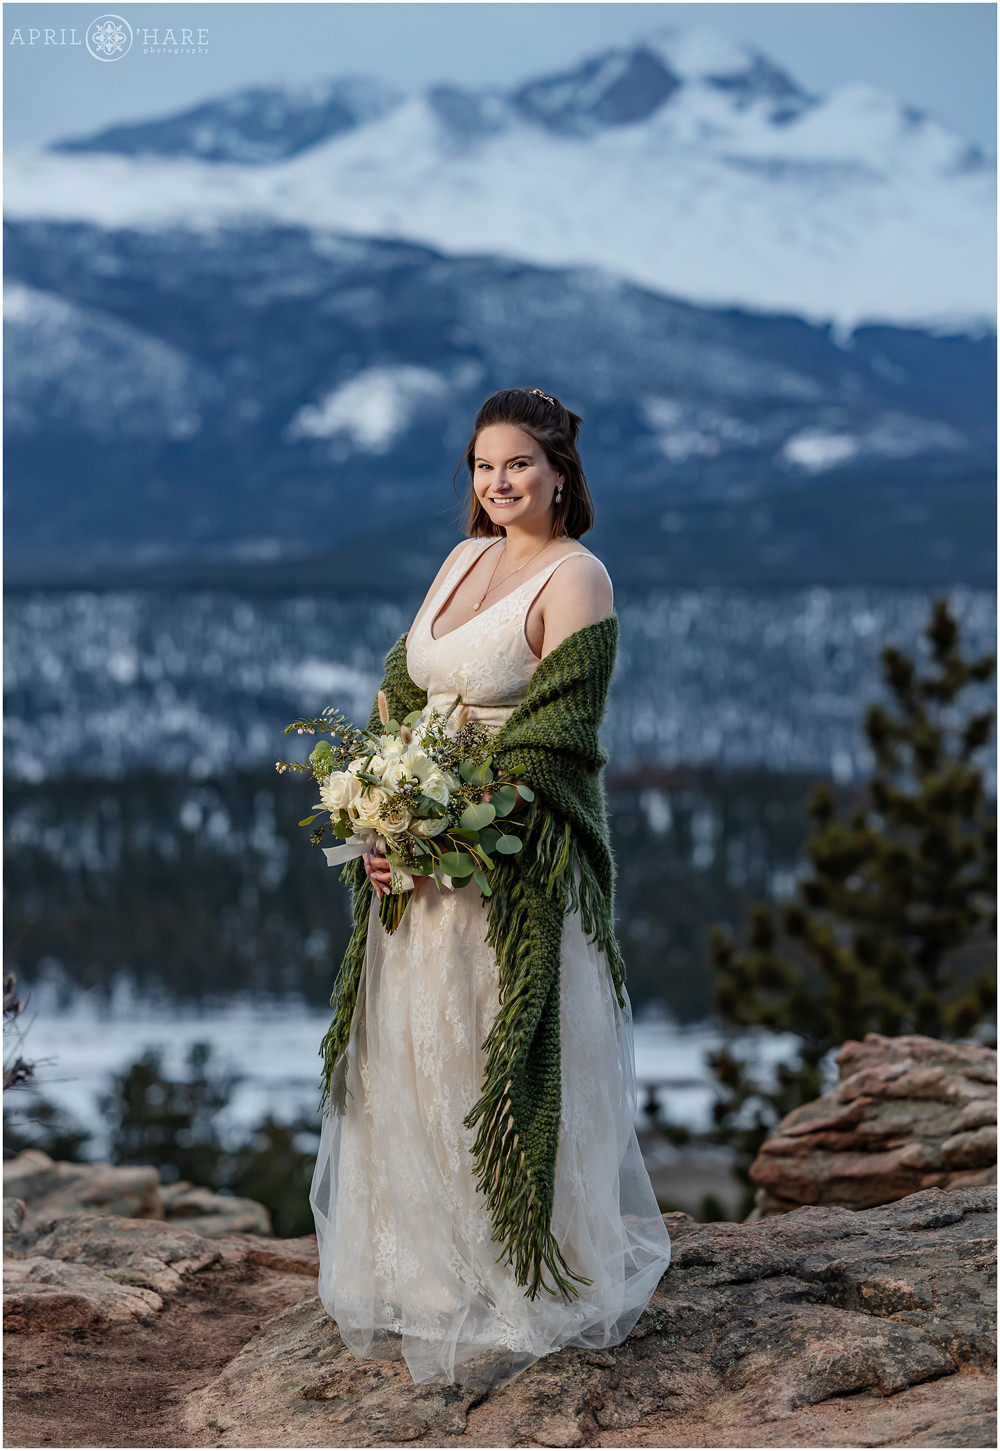 Full length bridal portrait for a pretty bride with short brunette hair holding a nice green and white bouquet and wearing a champagne colored gown with a green cozy shawl standing at 3M Curve with mountain backdrop